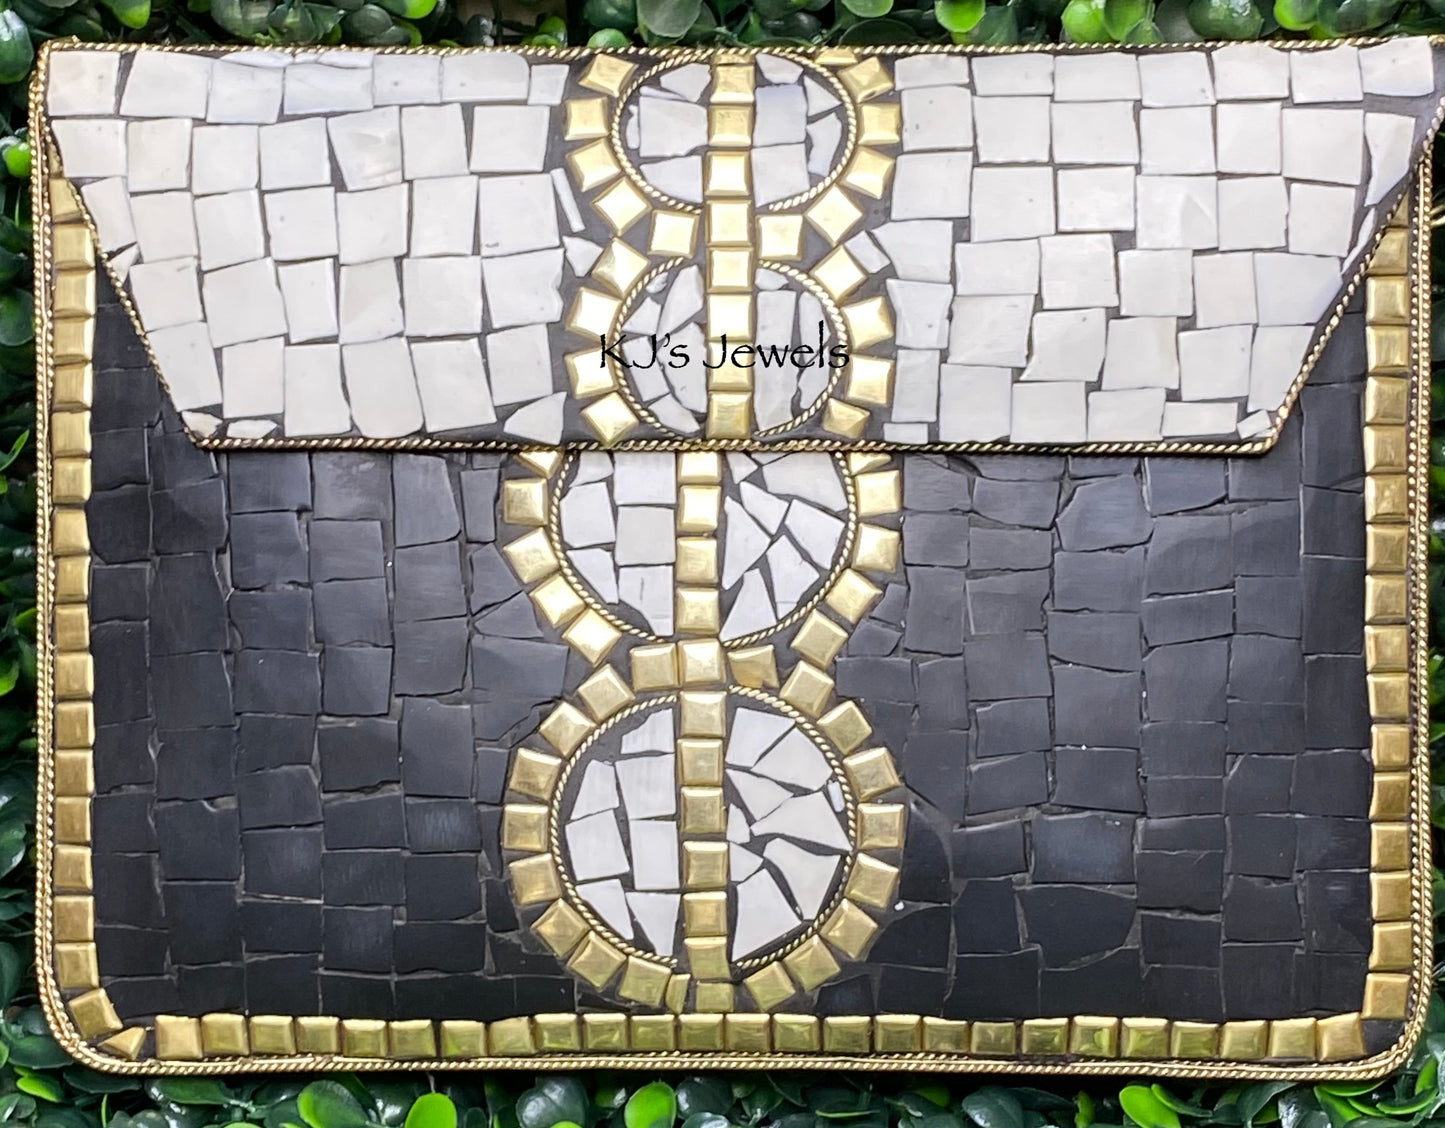 Black and White Mosaic Tile Bag with Gold Metal Accent Tiles